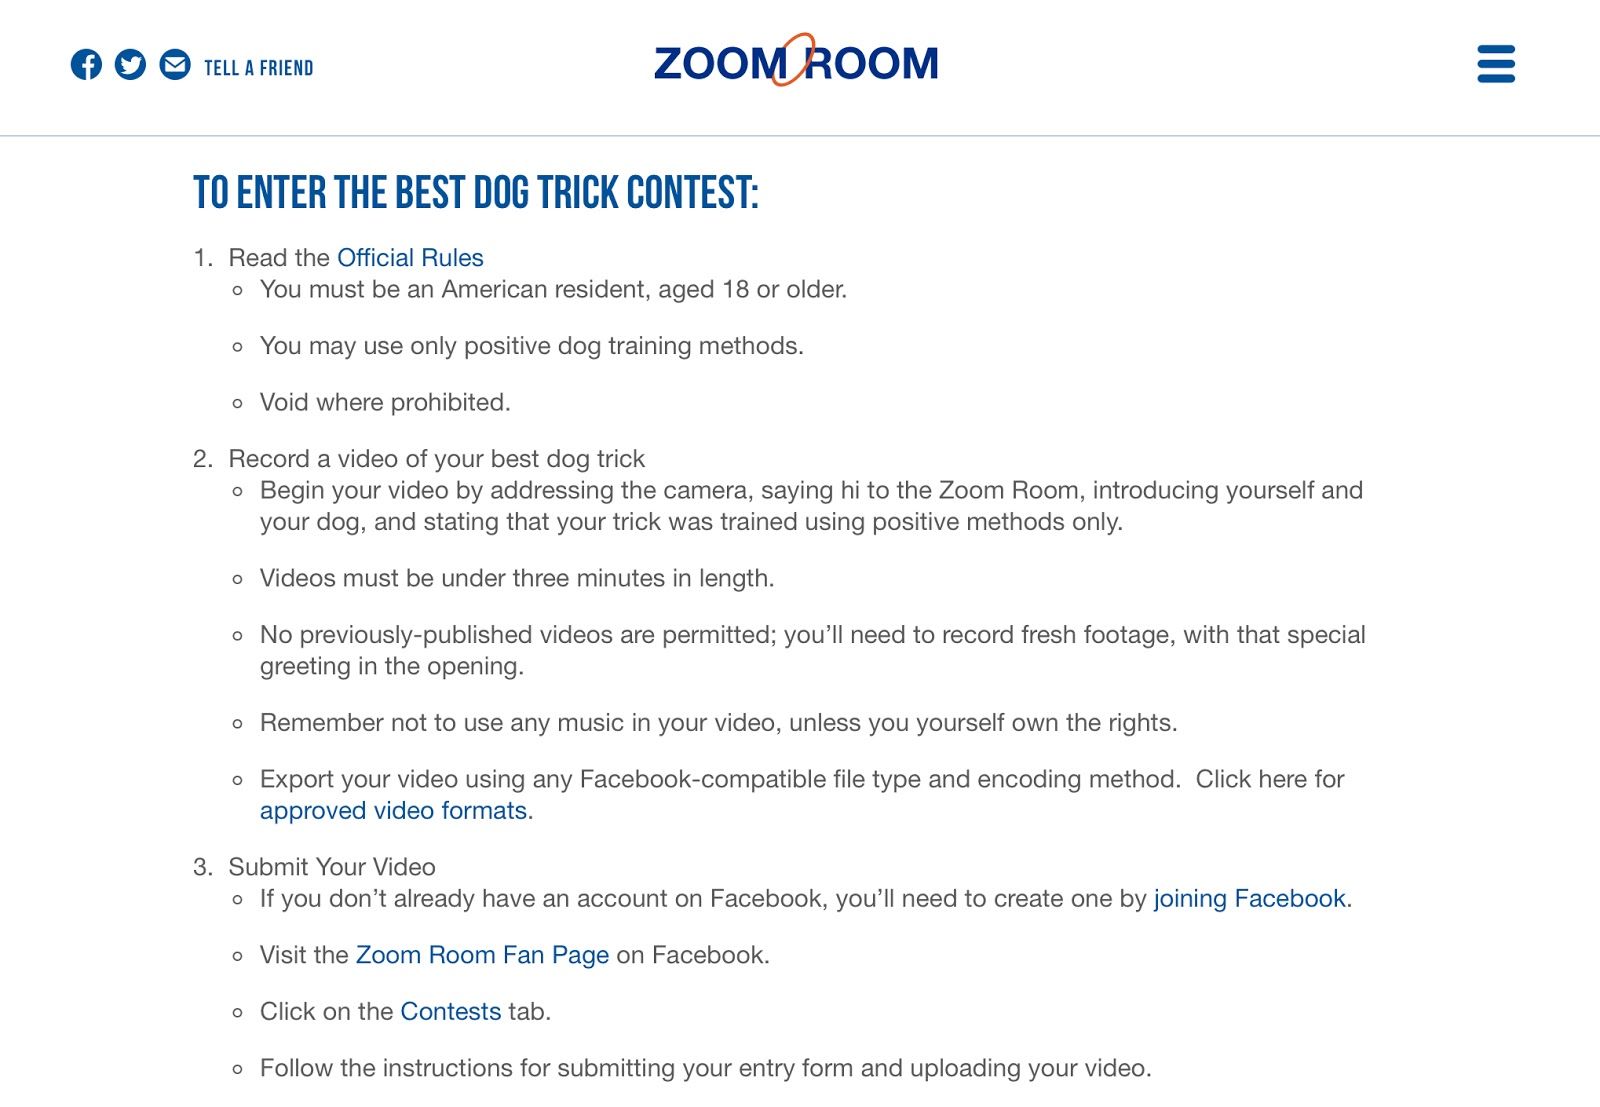 zoom room dog contest rules